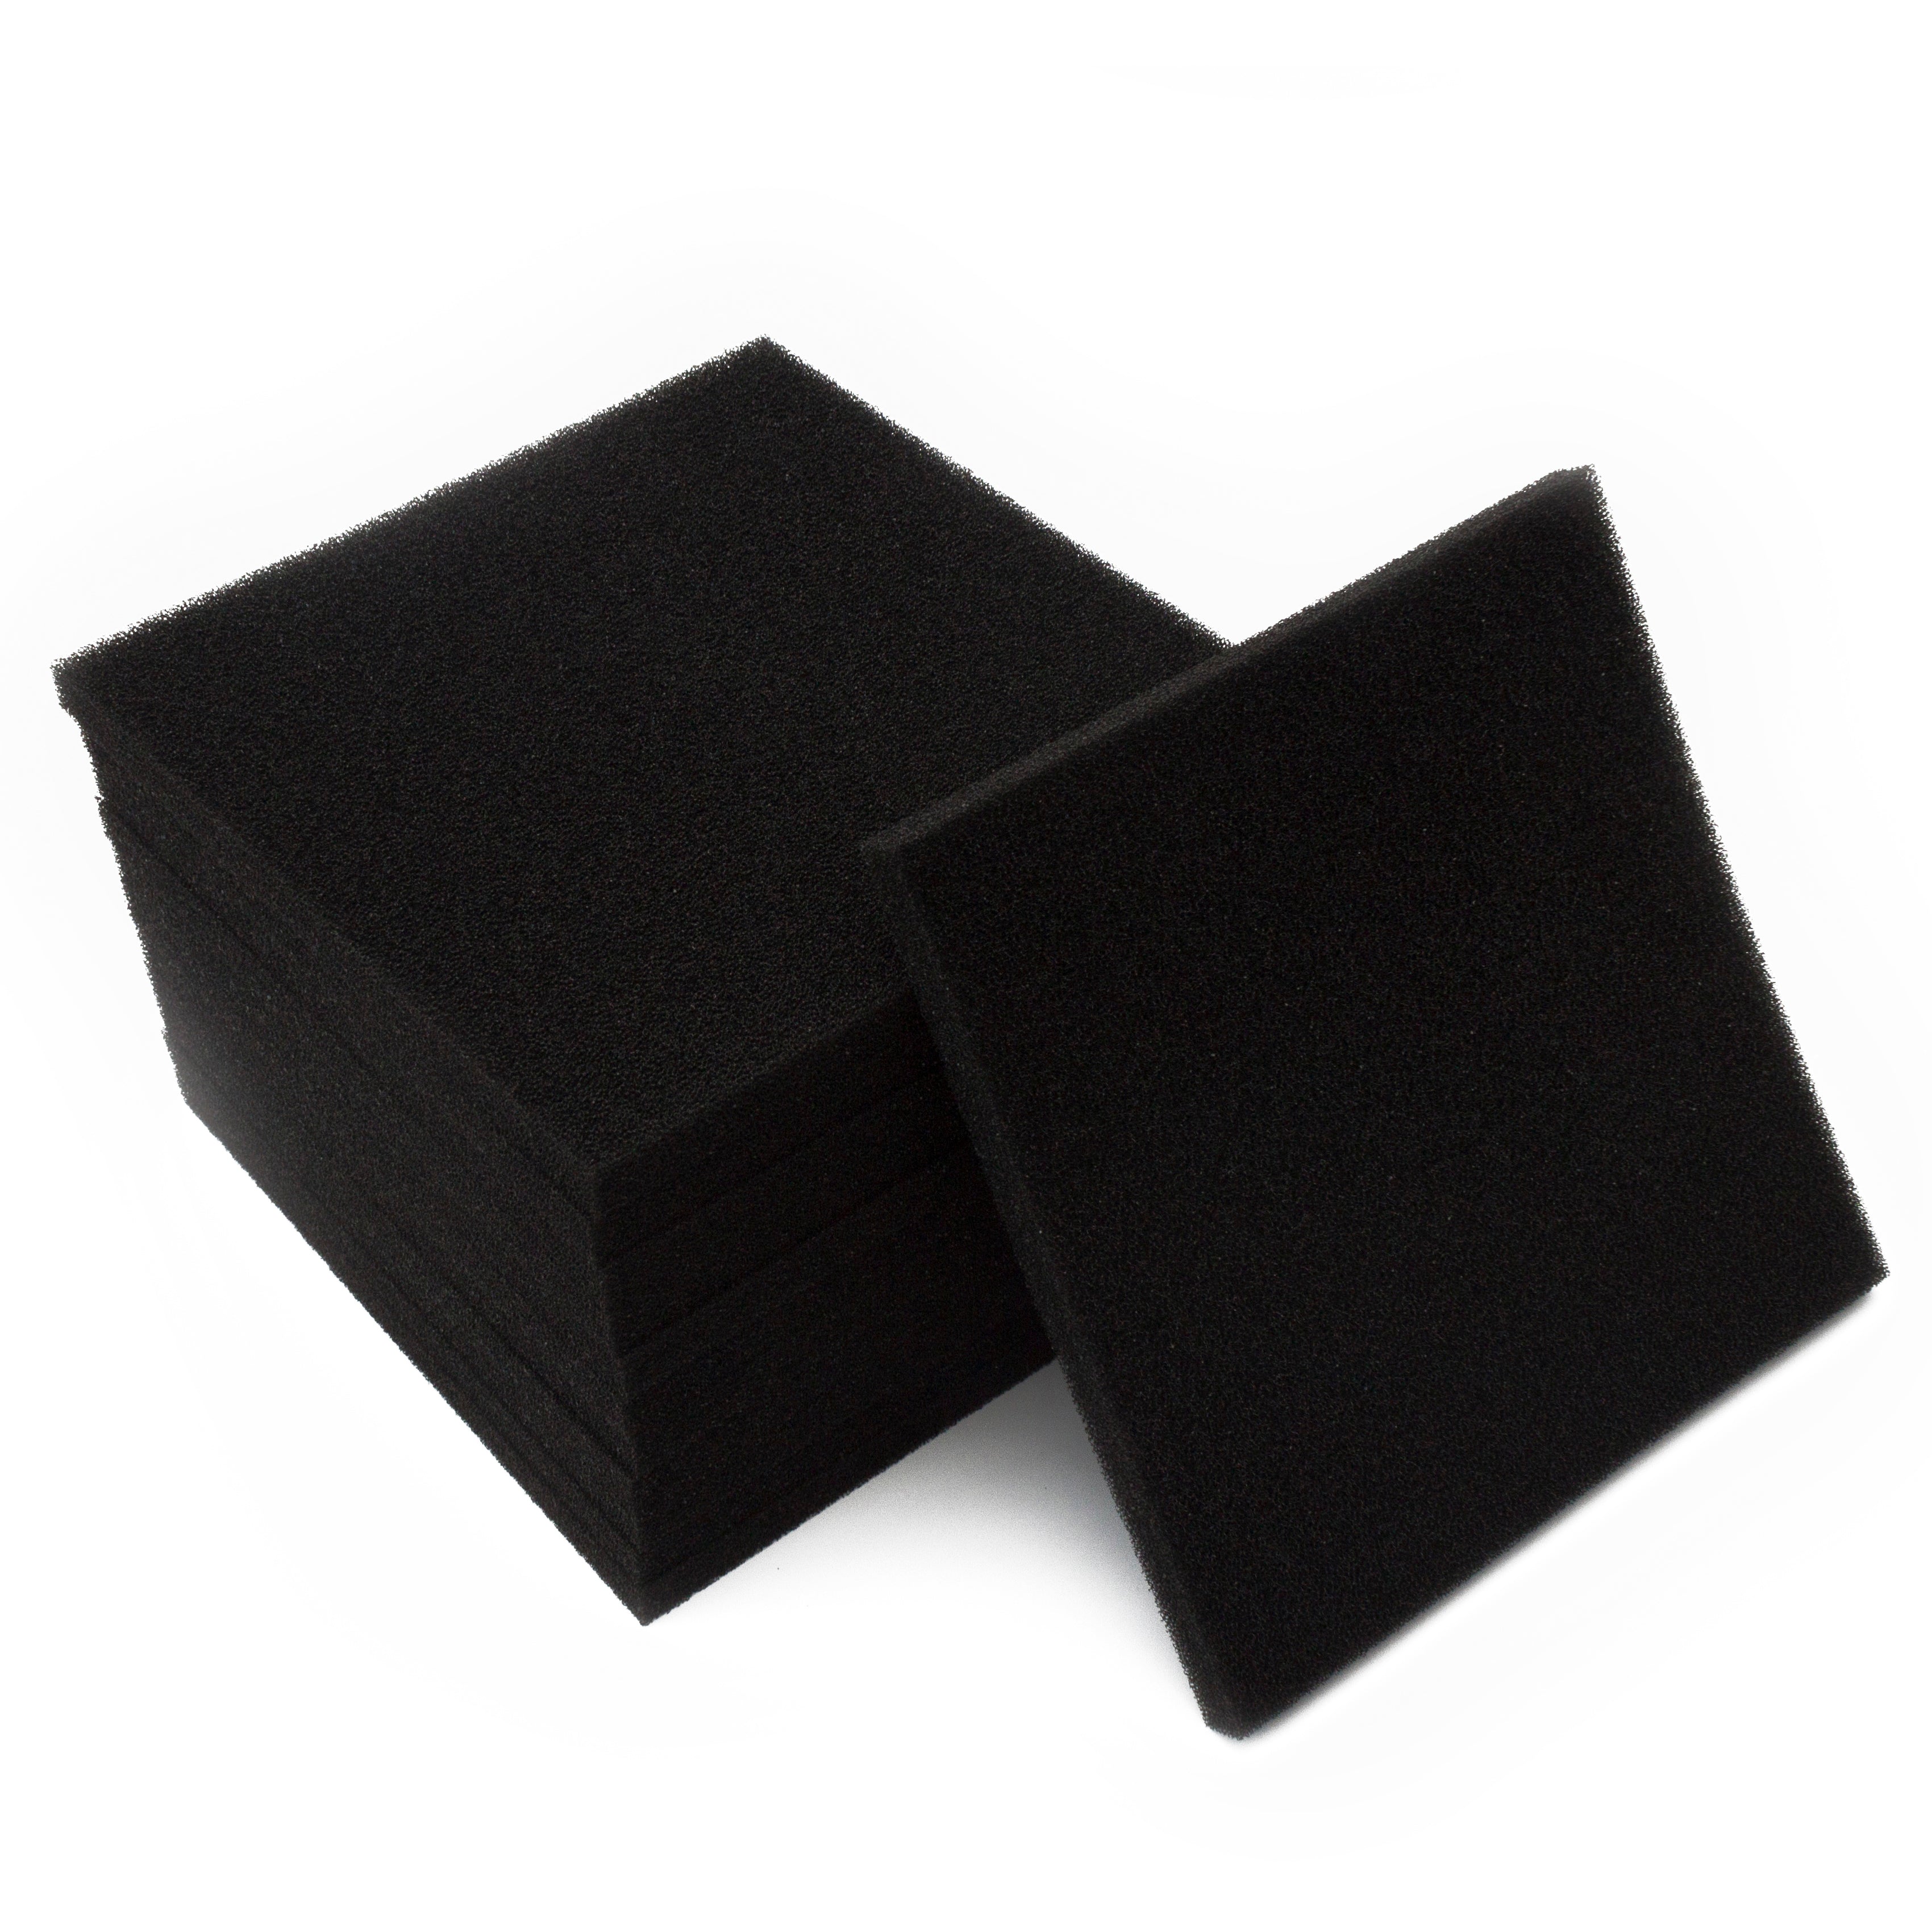 LTWHOME Black Foam Filter Pad Fit for Danner PM 1000 and PM 2000(Pack of 12)